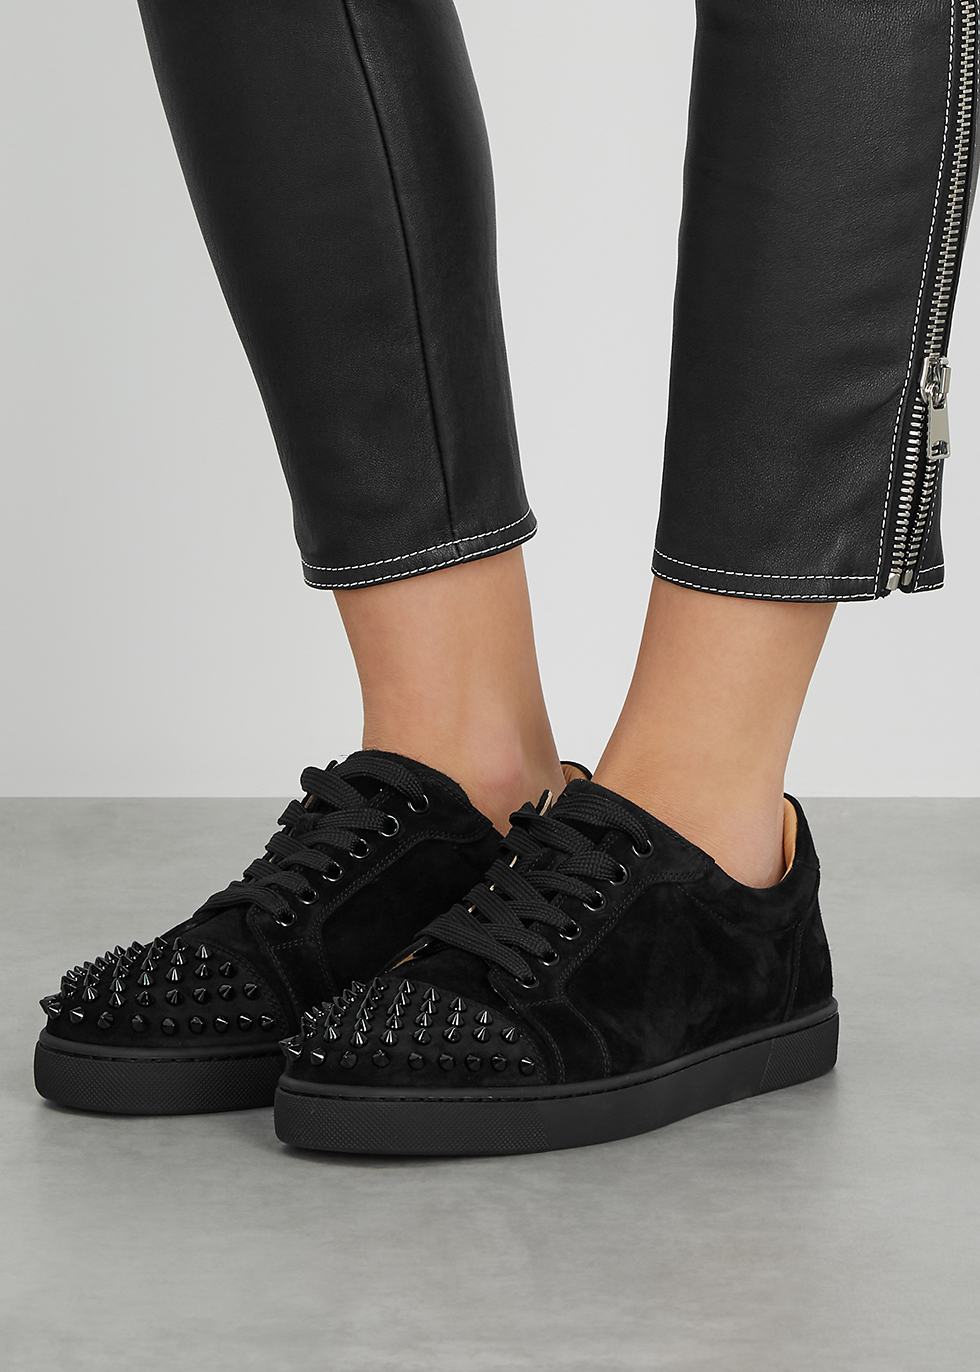 filosofisk eventyr Isse black christian louboutin sneakers with spikes